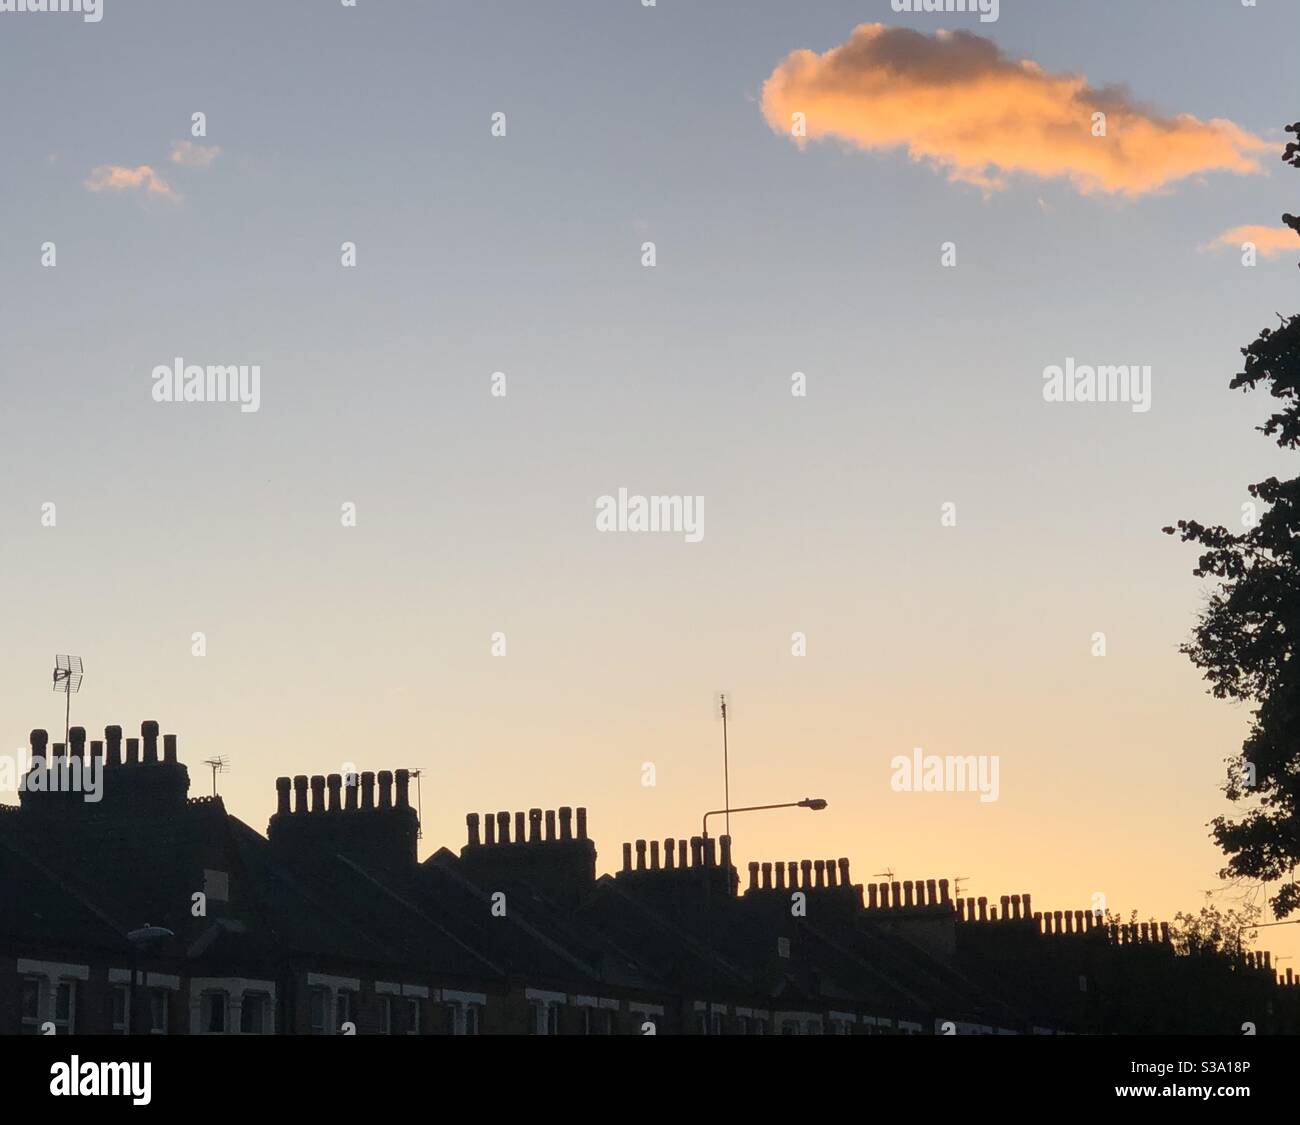 Rows of chimneys on terrace houses in london at sunset while a pink cloud floats above Stock Photo